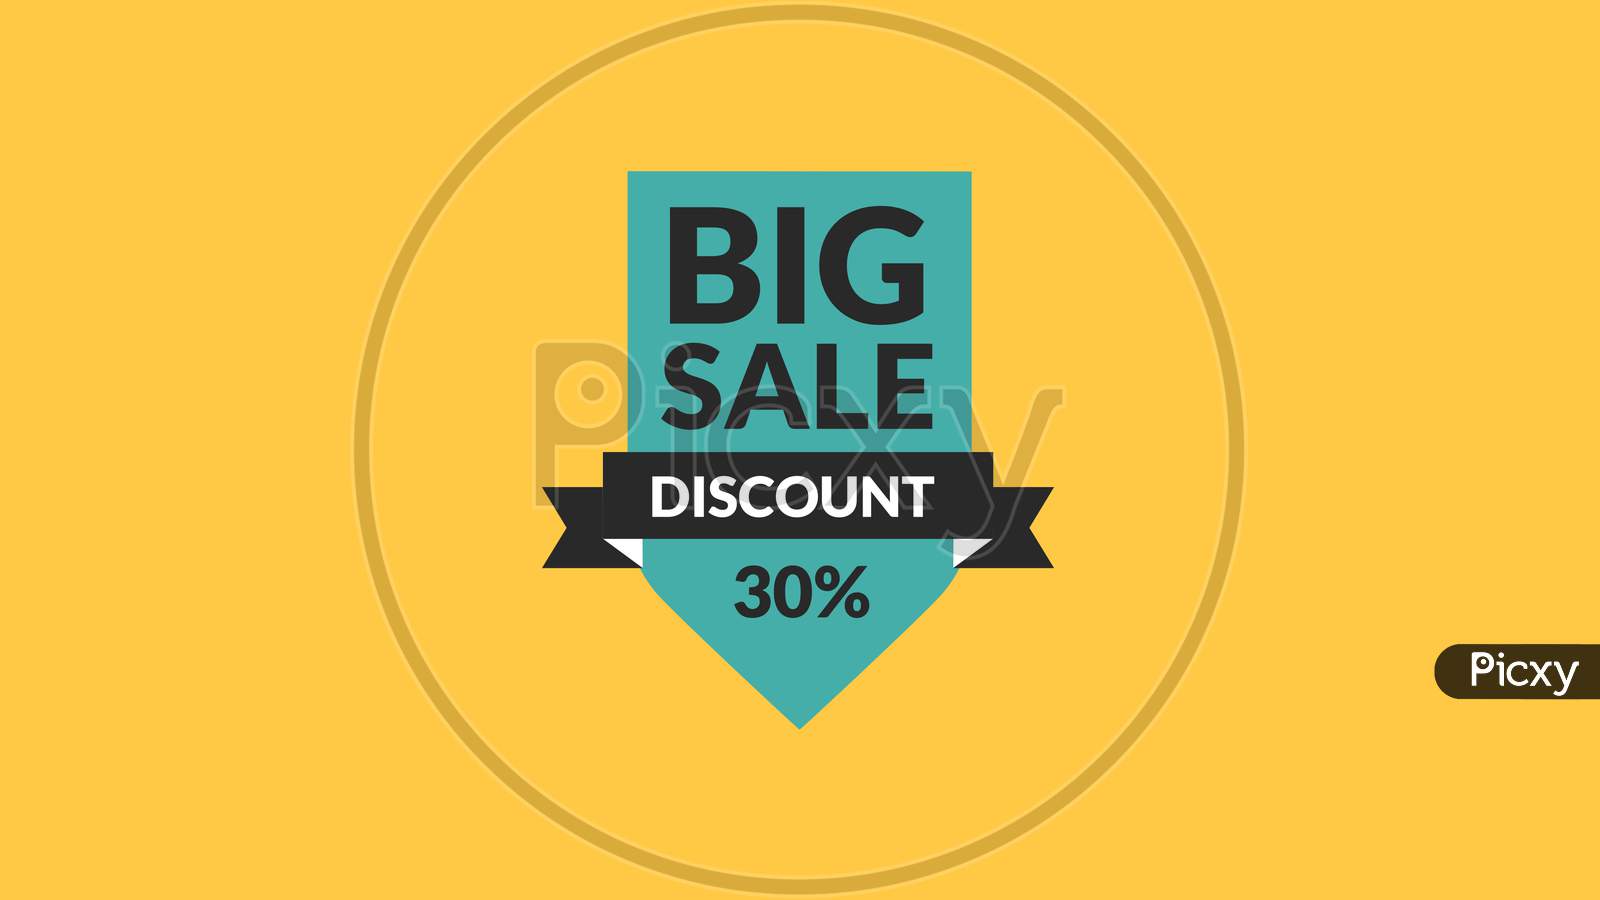 Big Sale Discount 30% Word Illustration Use For Landing Page, Template, Ui, Web, Poster, Banner, Flyer, Background, Gift Card, Coupon, Label, Wallpaper,Sale Promotion,Advertising, Marketing